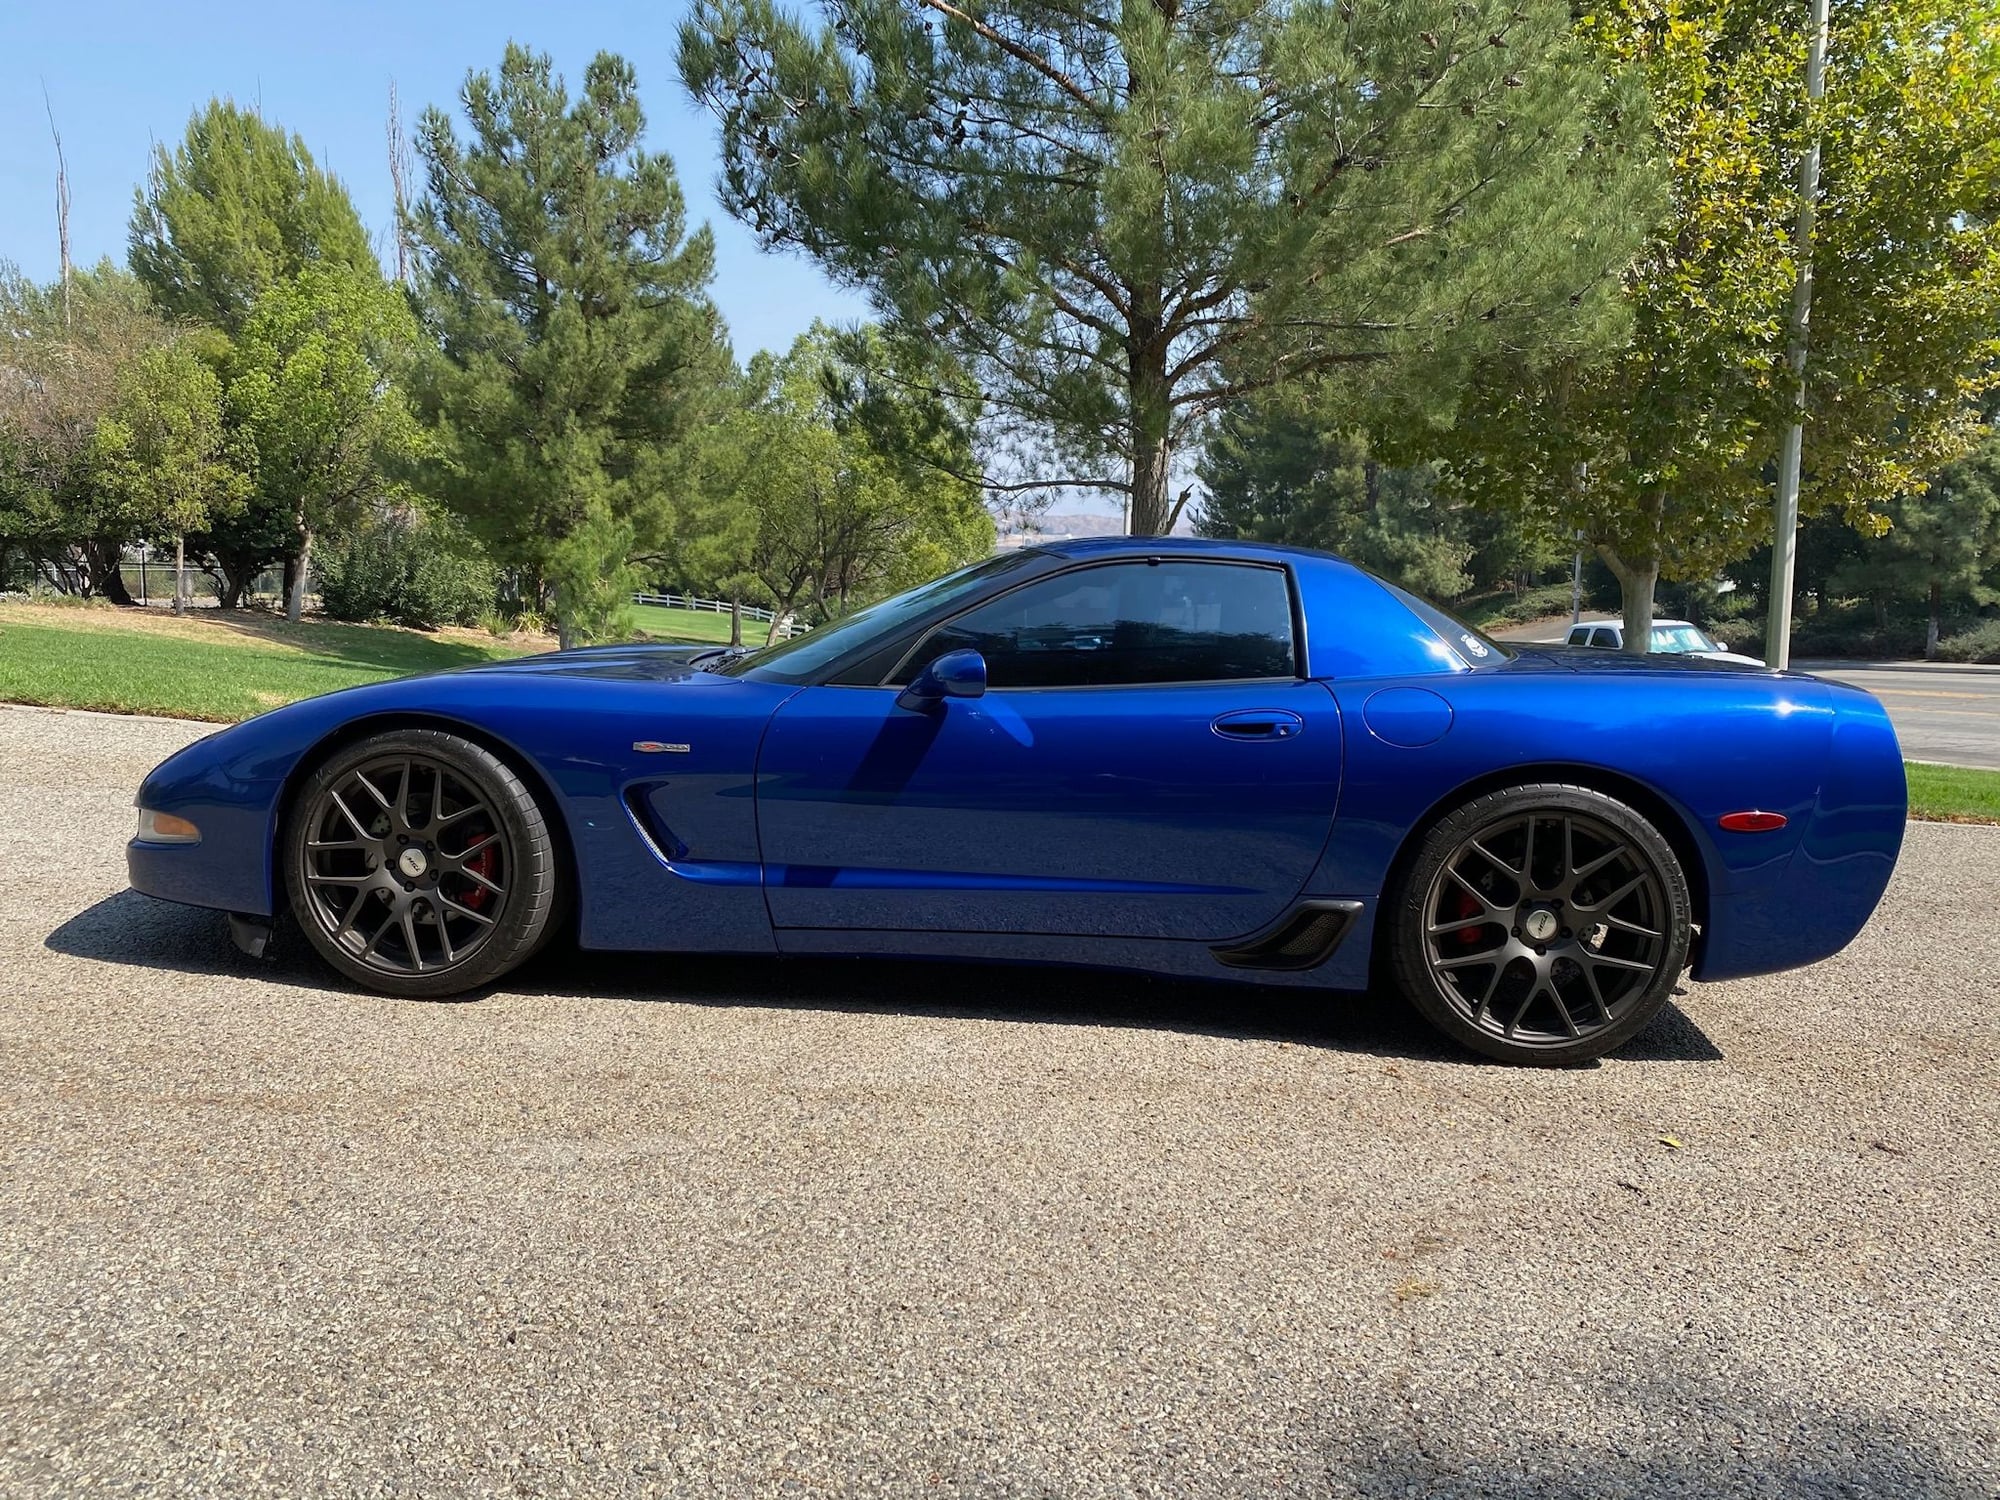 Wtb Want To Buy Looking For A 2002 2003 Electron Blue C5